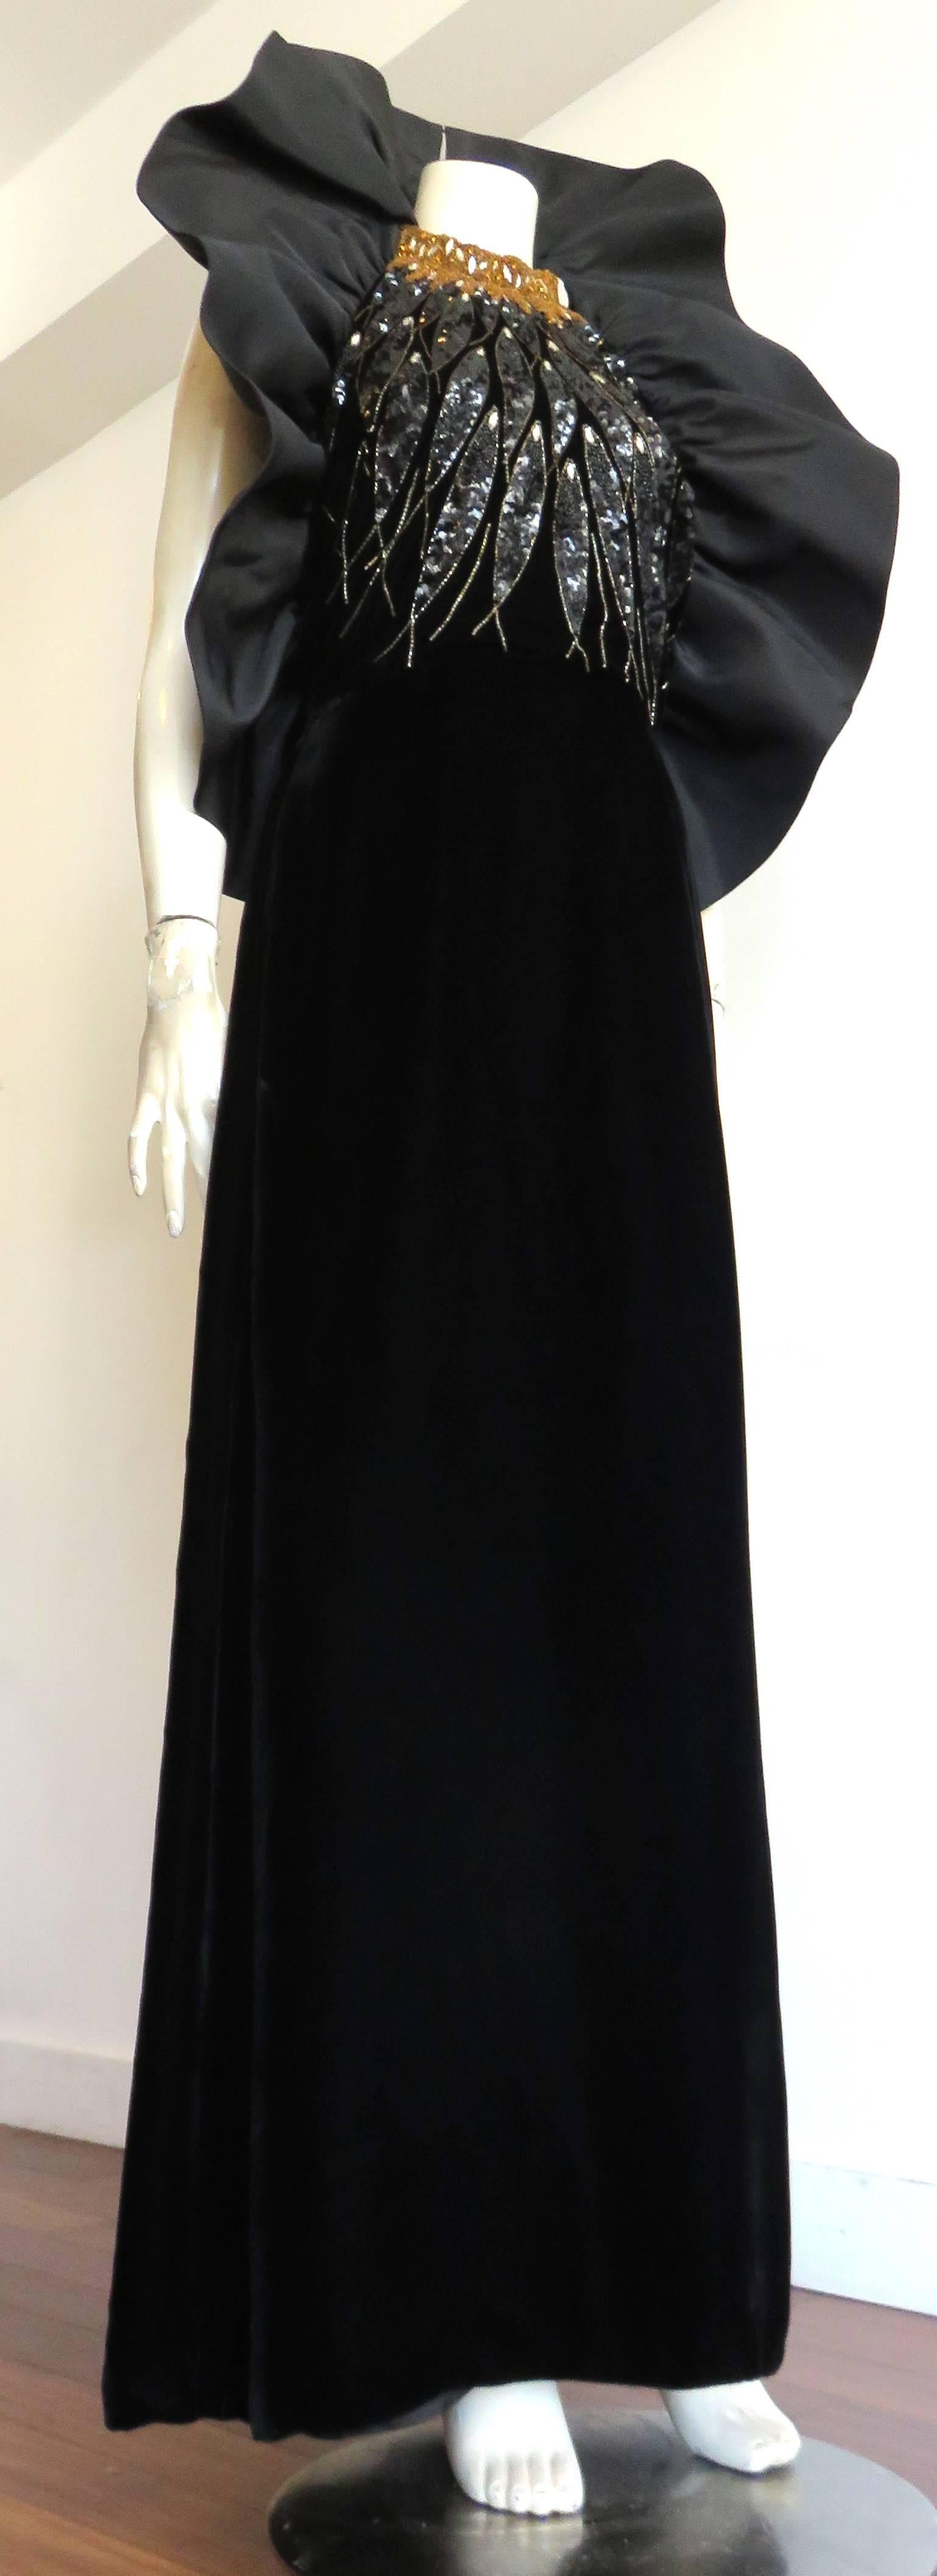 Excellent condition, 1980's, PAUL-LOUIS ORRIER, embellished, silk velvet evening gown.

This extraordinary evening gown is made of ultra-soft, black, silk, velvet with hand-beading, and sequined artwork on the front torso bodice.  

The